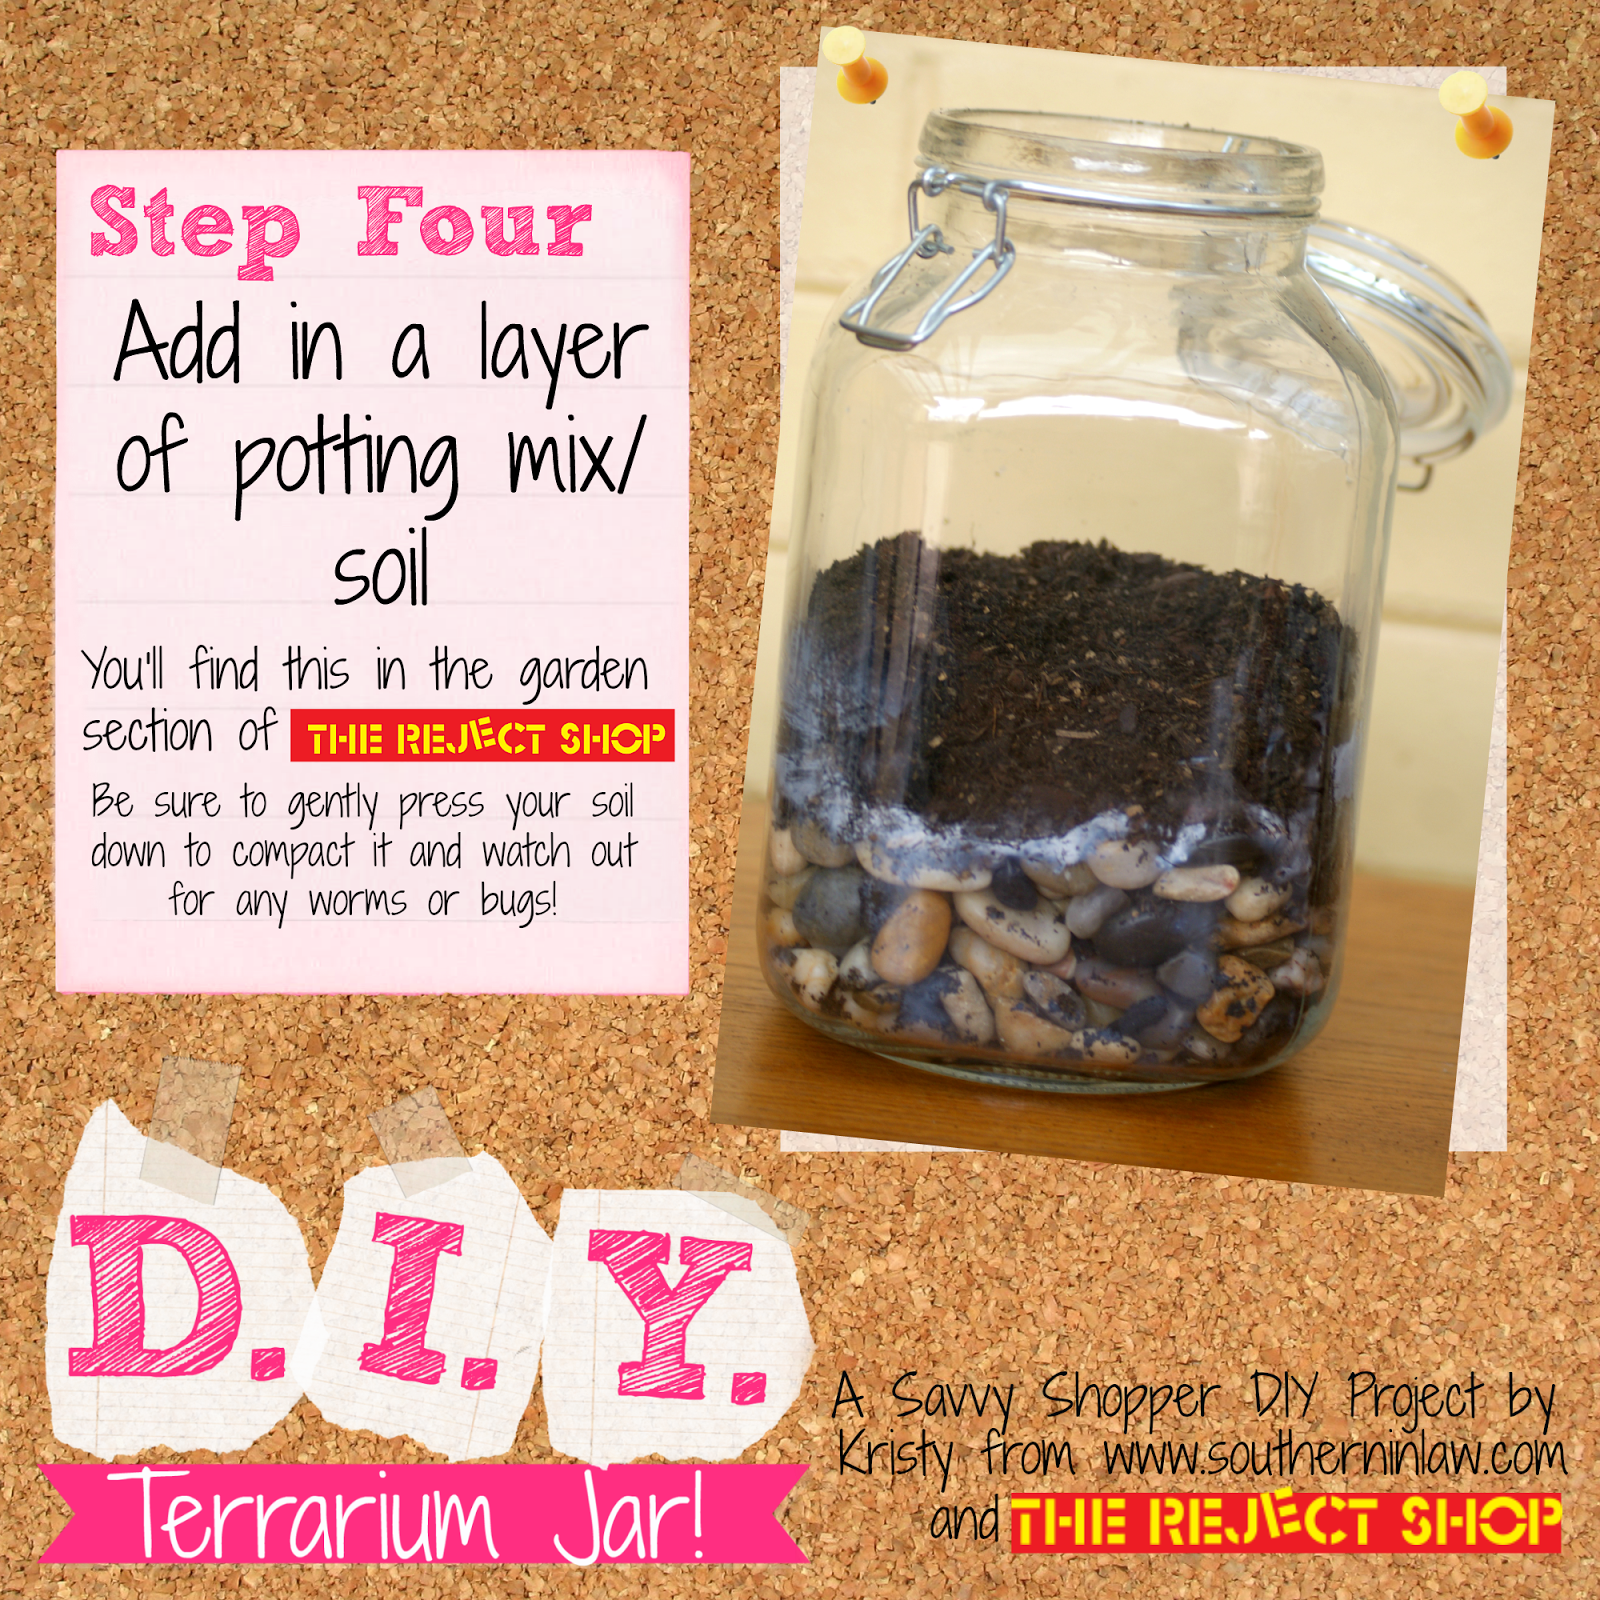 How to Make a Terrarium Jar on a Budget - Simple Weekend Projects - Dollar Store Craft Projects for Kids